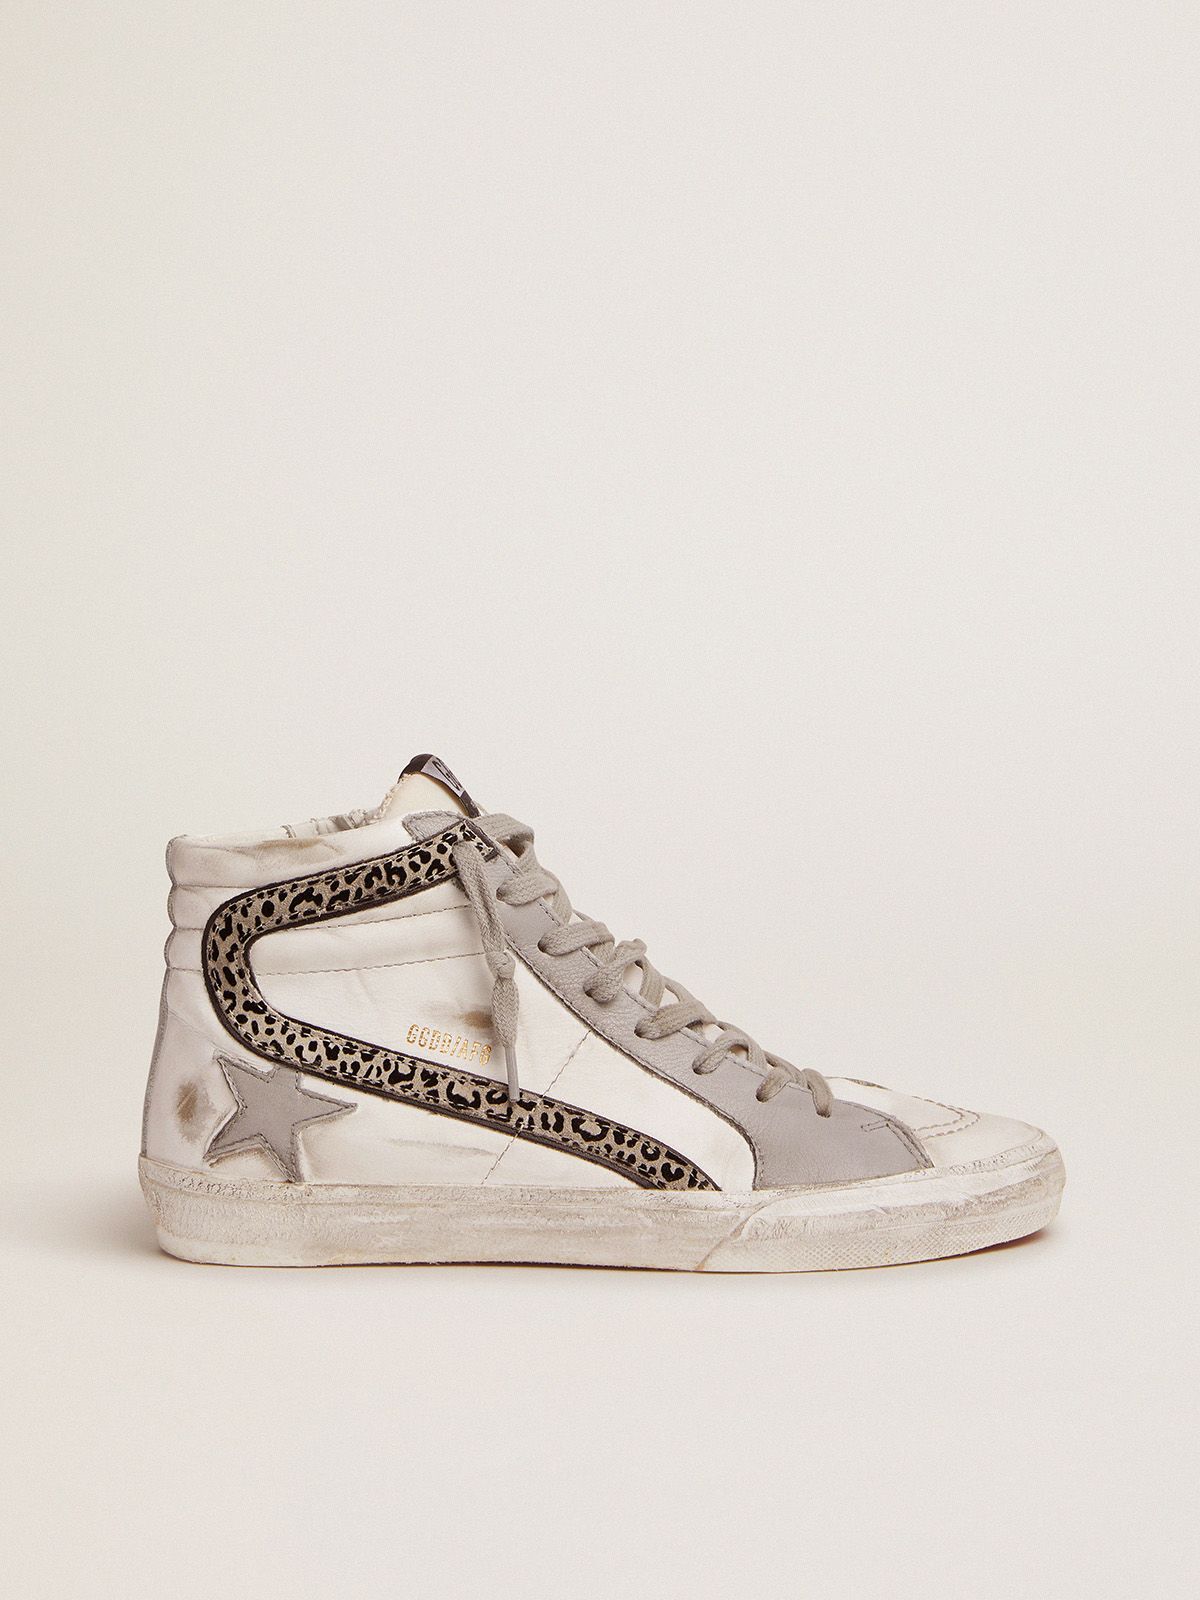 golden goose upper sneakers flash and gray leather Slide leopard-print with white suede